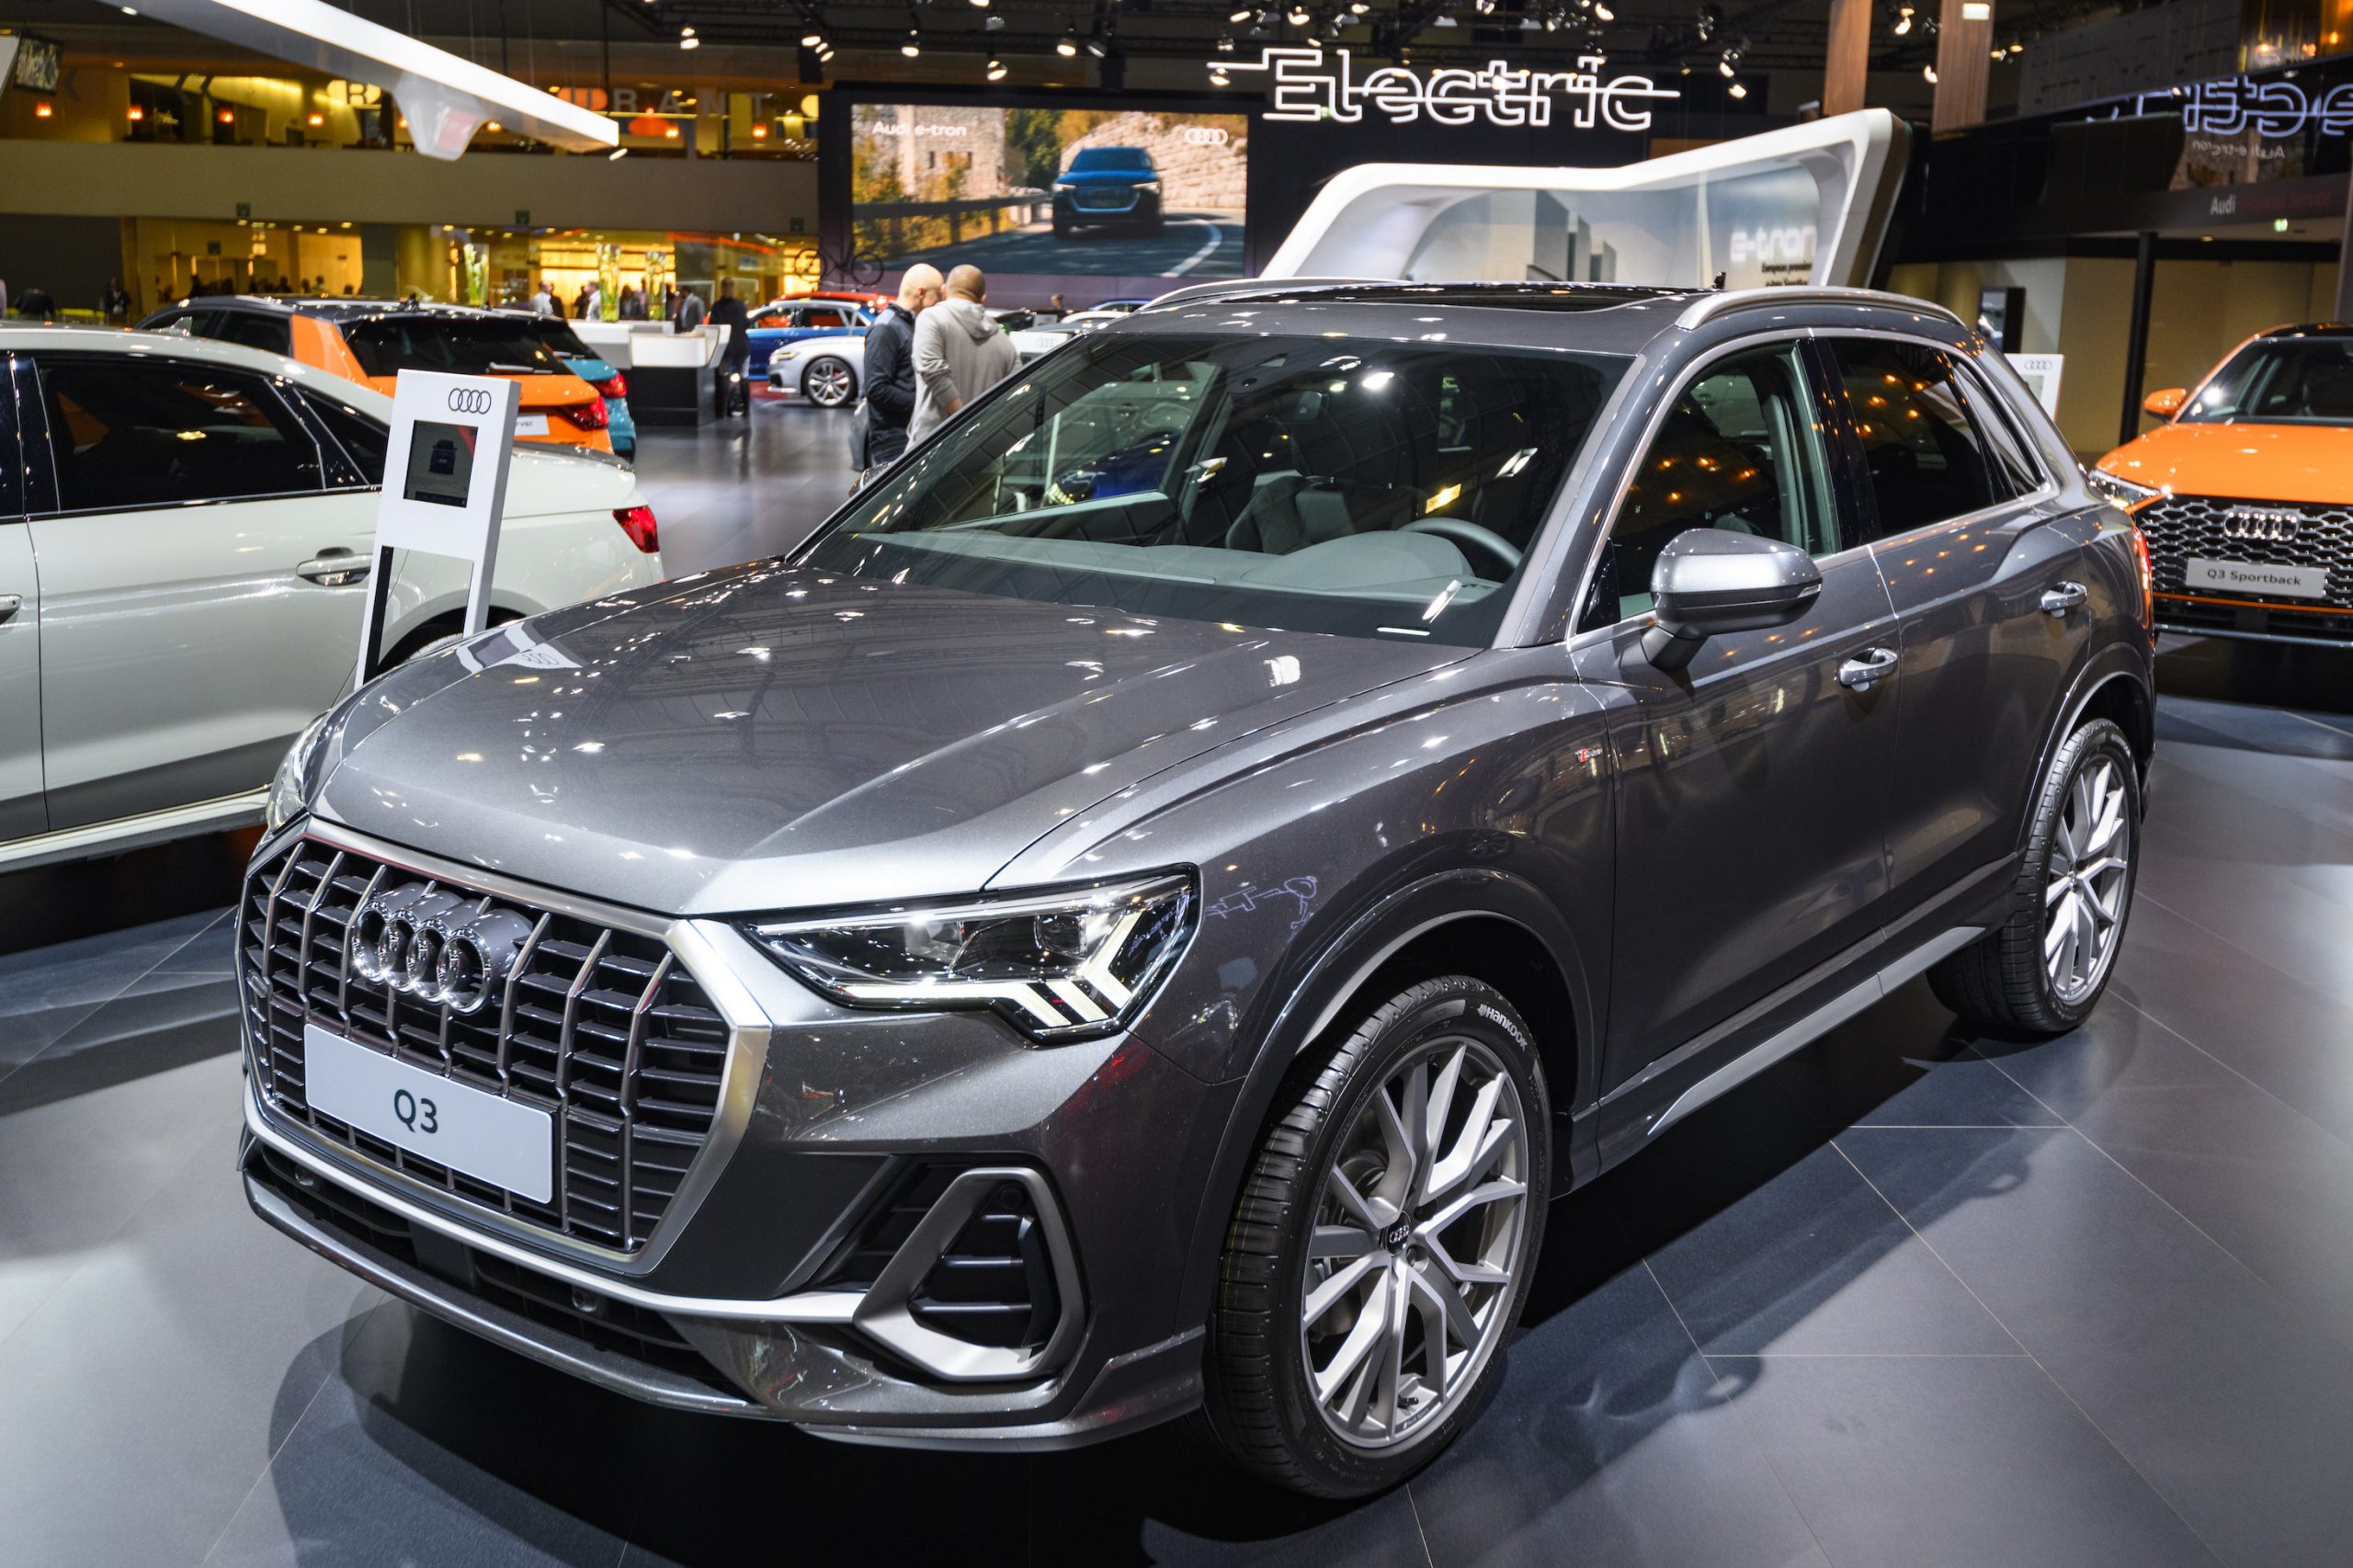 Audi Q3 compact luxury SUV on display at Brussels Expo